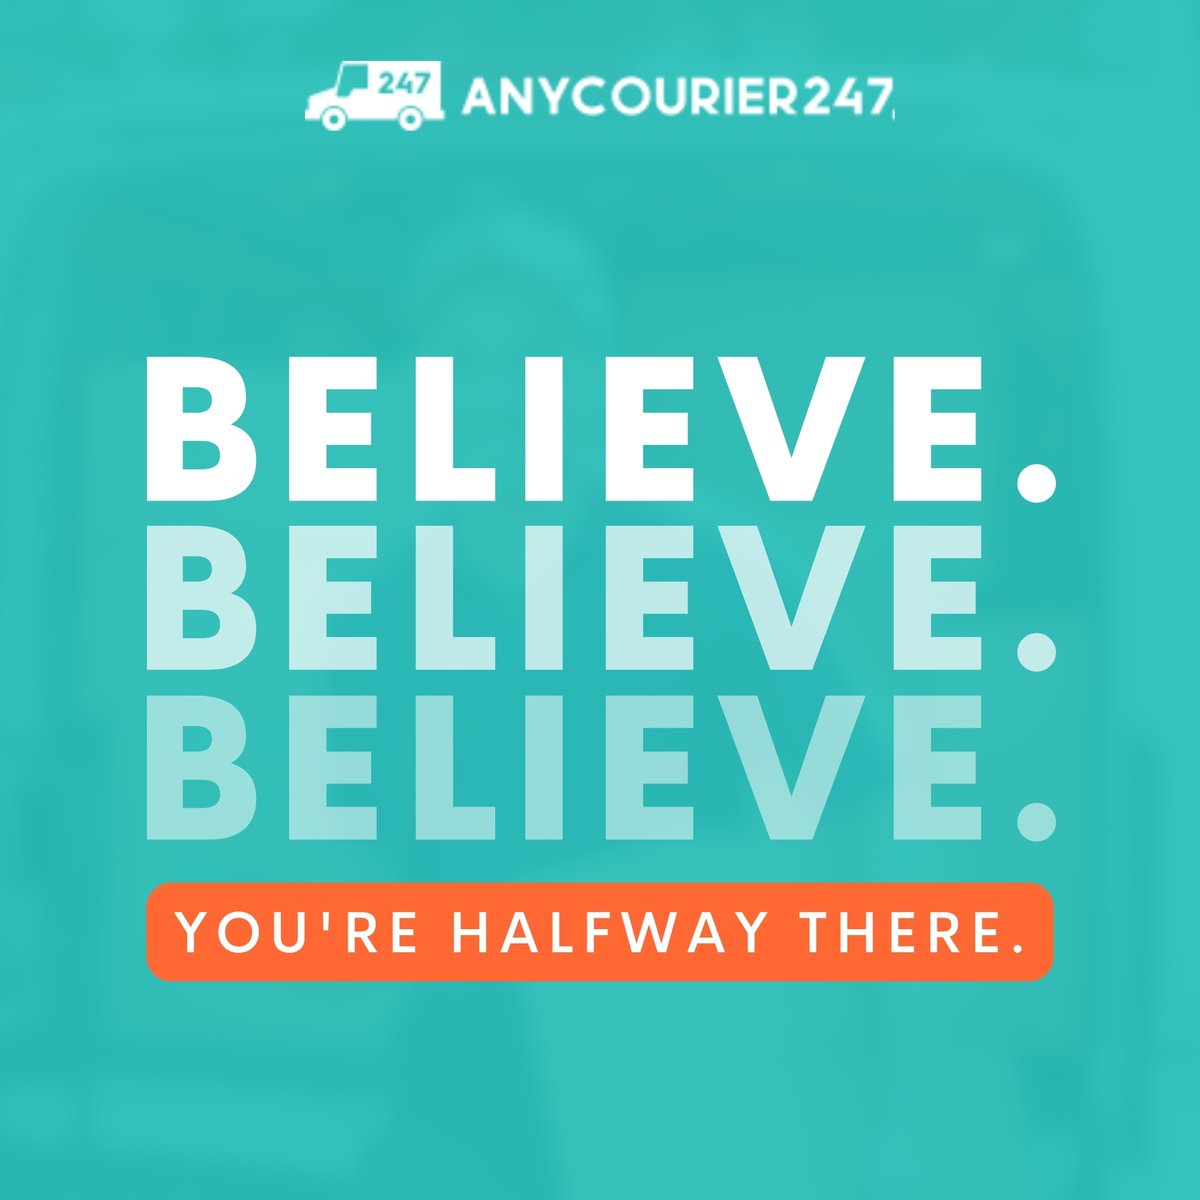 Believe in yourself; you're halfway to success! 🌟 Keep pushing forward with confidence and determination. Your belief is the fuel that propels you toward your goals. You've got this! #BelieveInYourself #YouCanDoIt 
#anycourier247 #couriermarketplace #trustedcouriers